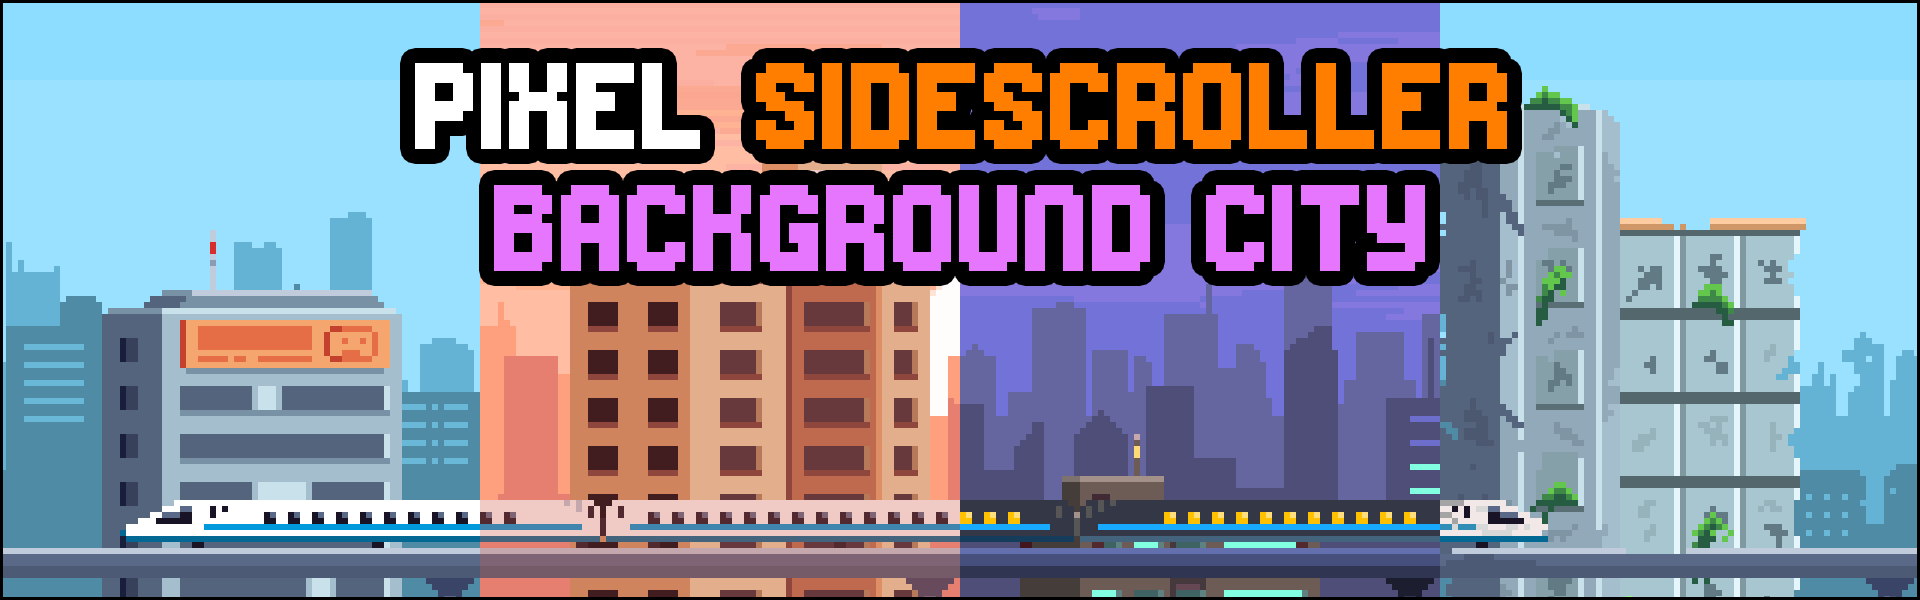 Pixel Sidescroller Background City